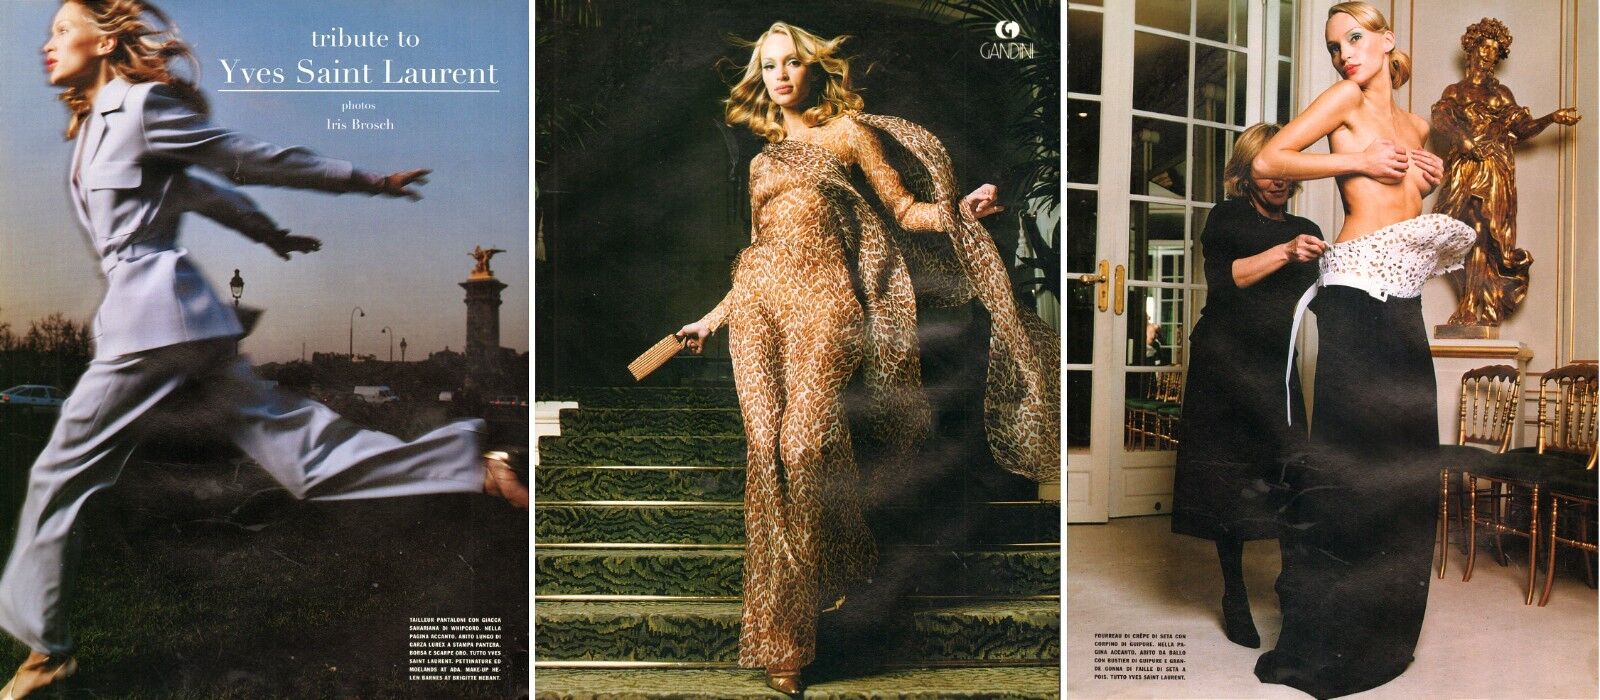 Modern Italian Magazine Ad TRIBUTE TO YVES SAINT LAURENT Nudity 7 pages  040315